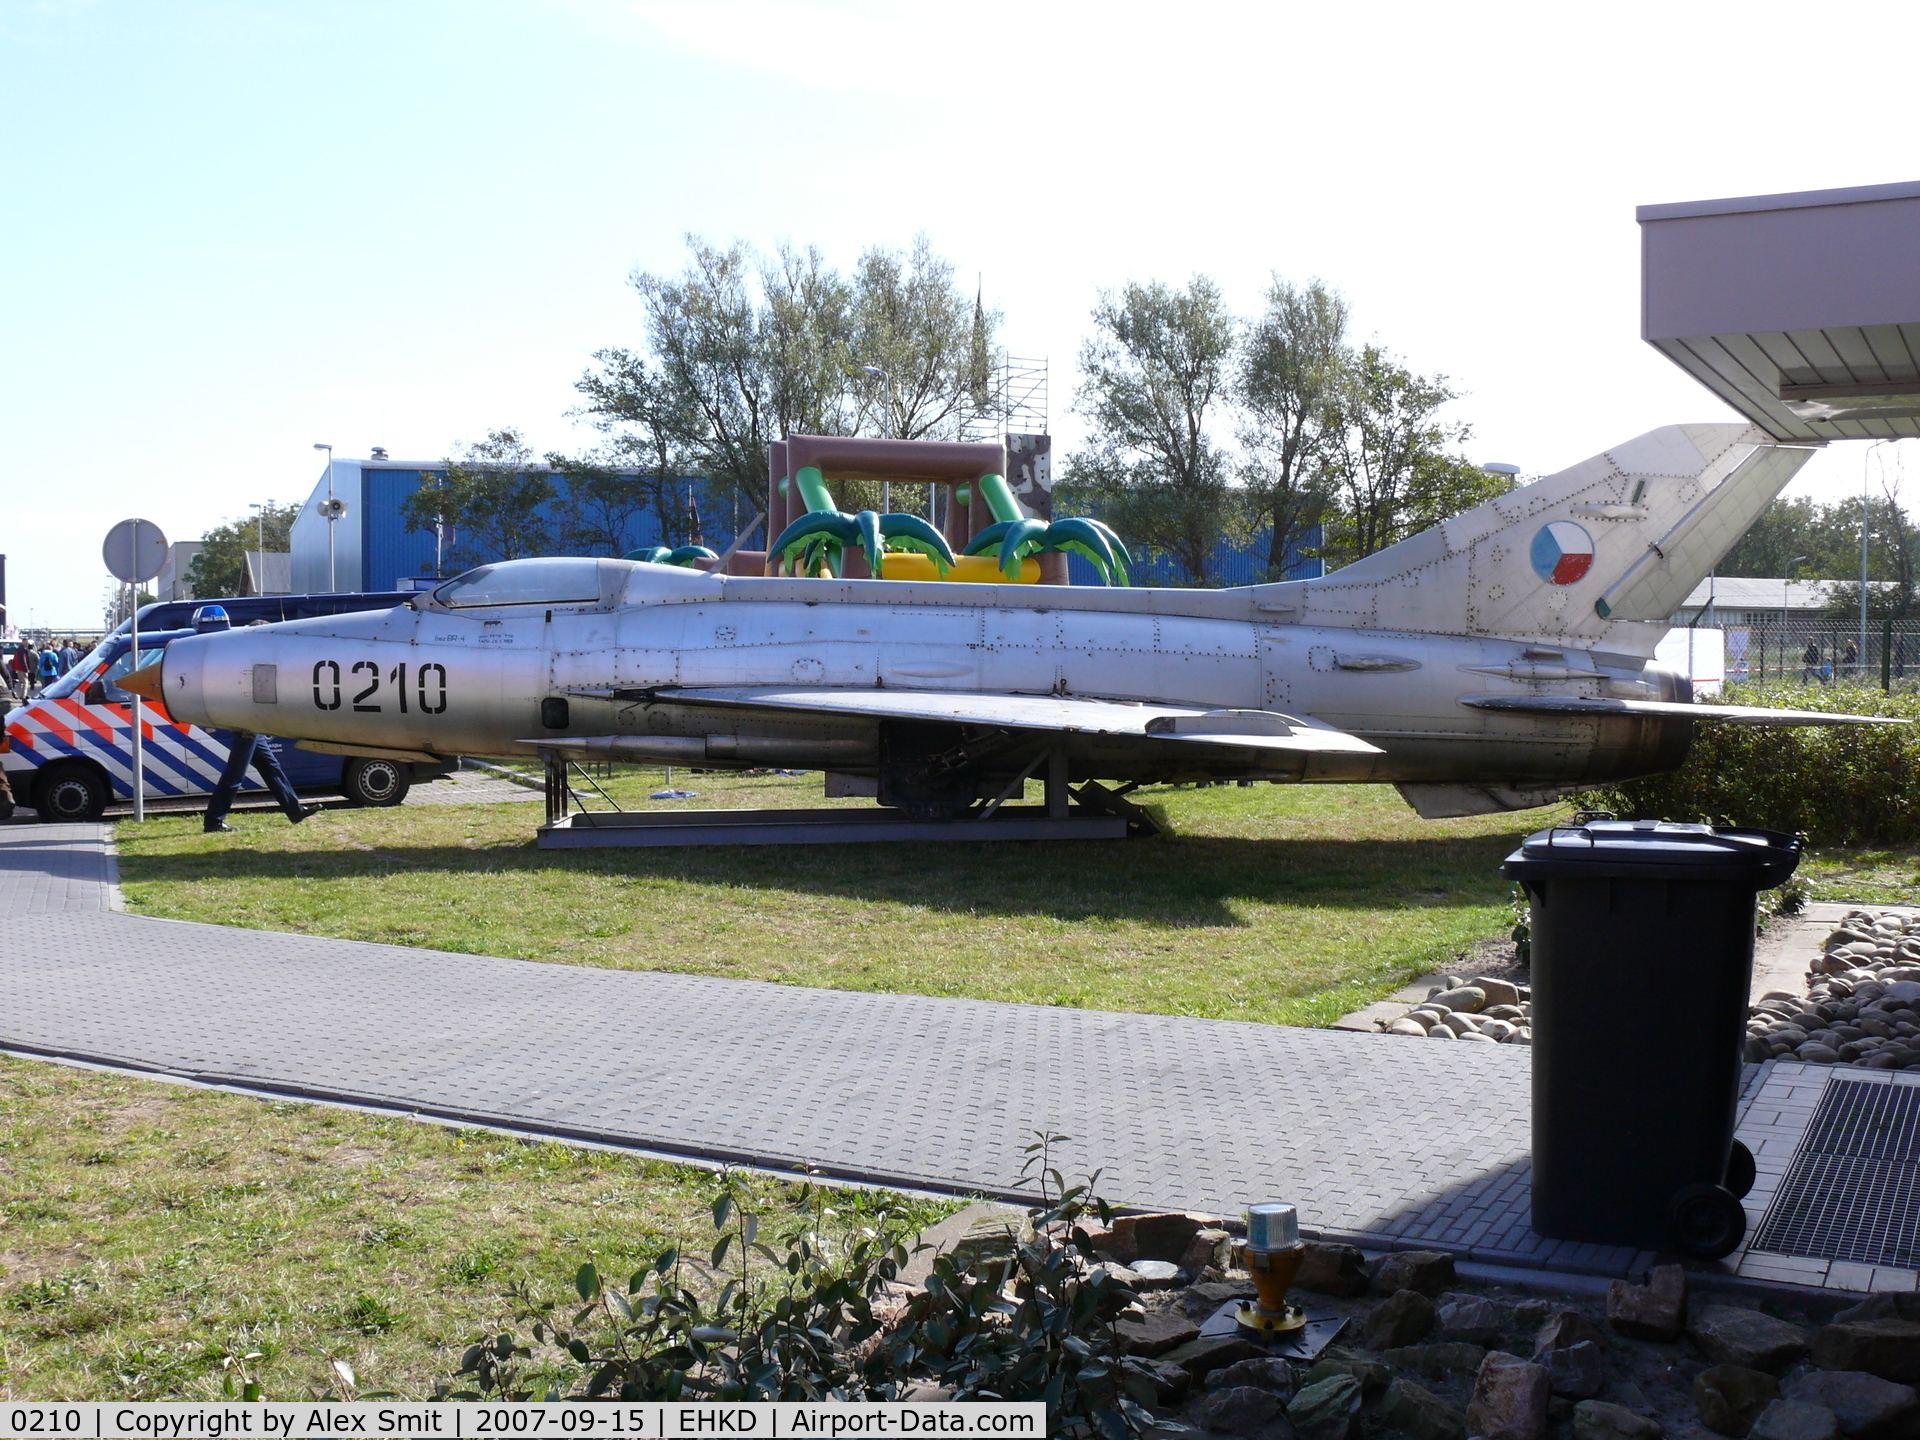 0210, Mikoyan-Gurevich MiG-21F-13 C/N 460210, Mig21 Fishbed on a bed of wood near the tower